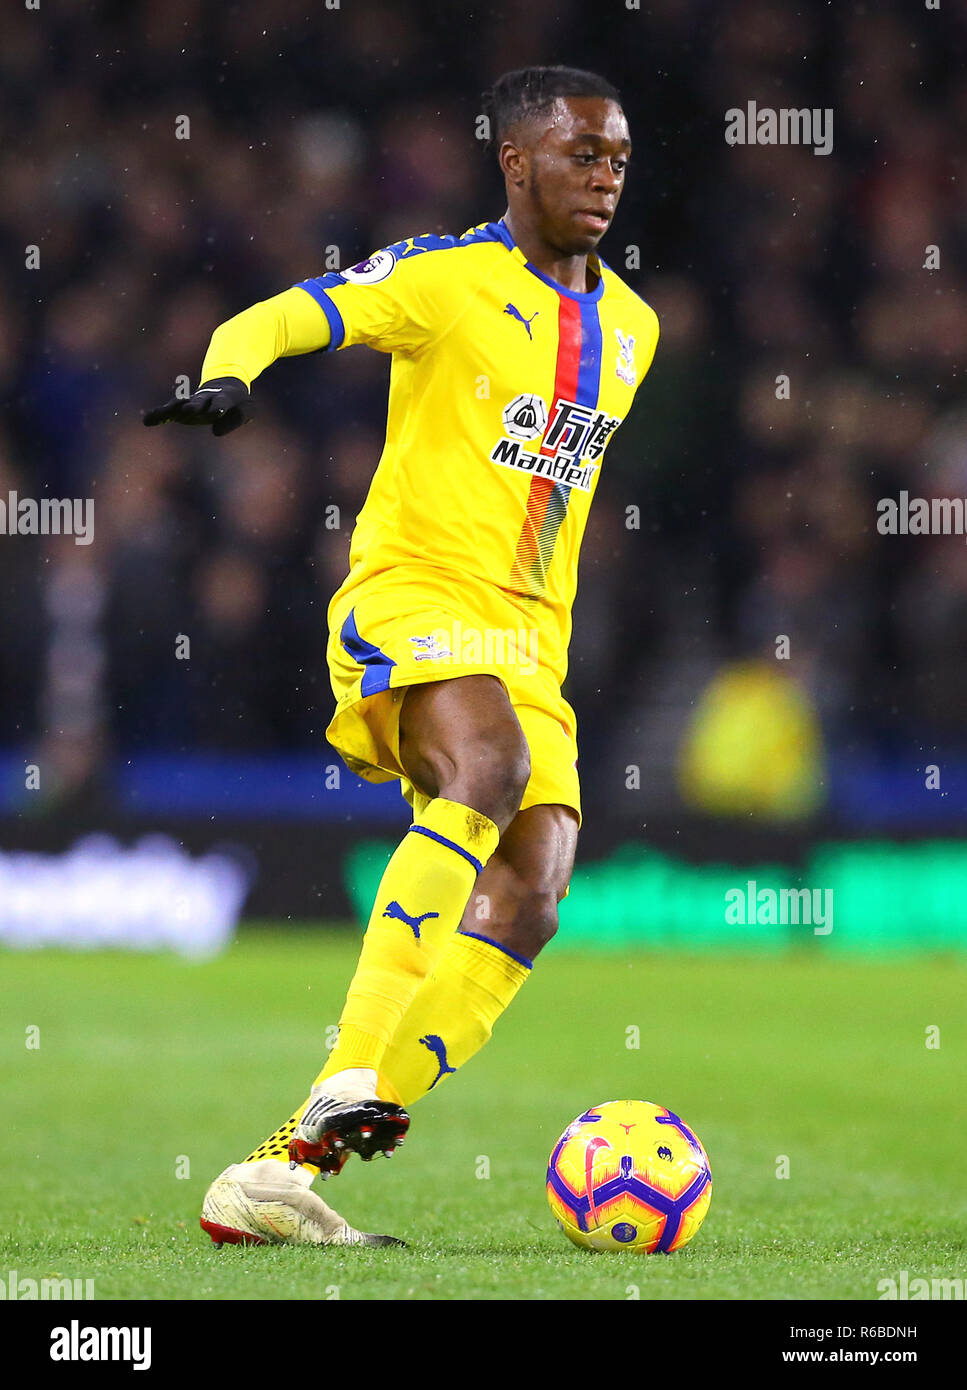 Crystal Palace's Aaron Wan-Bissaka during the Premier League match at the AMEX Stadium, Brighton. PRESS ASSOCIATION Photo. Picture date: Tuesday December 4, 2018. See PA story SOCCER Brighton. Photo credit should read: Gareth Fuller/PA Wire. RESTRICTIONS: No use with unauthorised audio, video, data, fixture lists, club/league logos or 'live' services. Online in-match use limited to 120 images, no video emulation. No use in betting, games or single club/league/player publications. Stock Photo